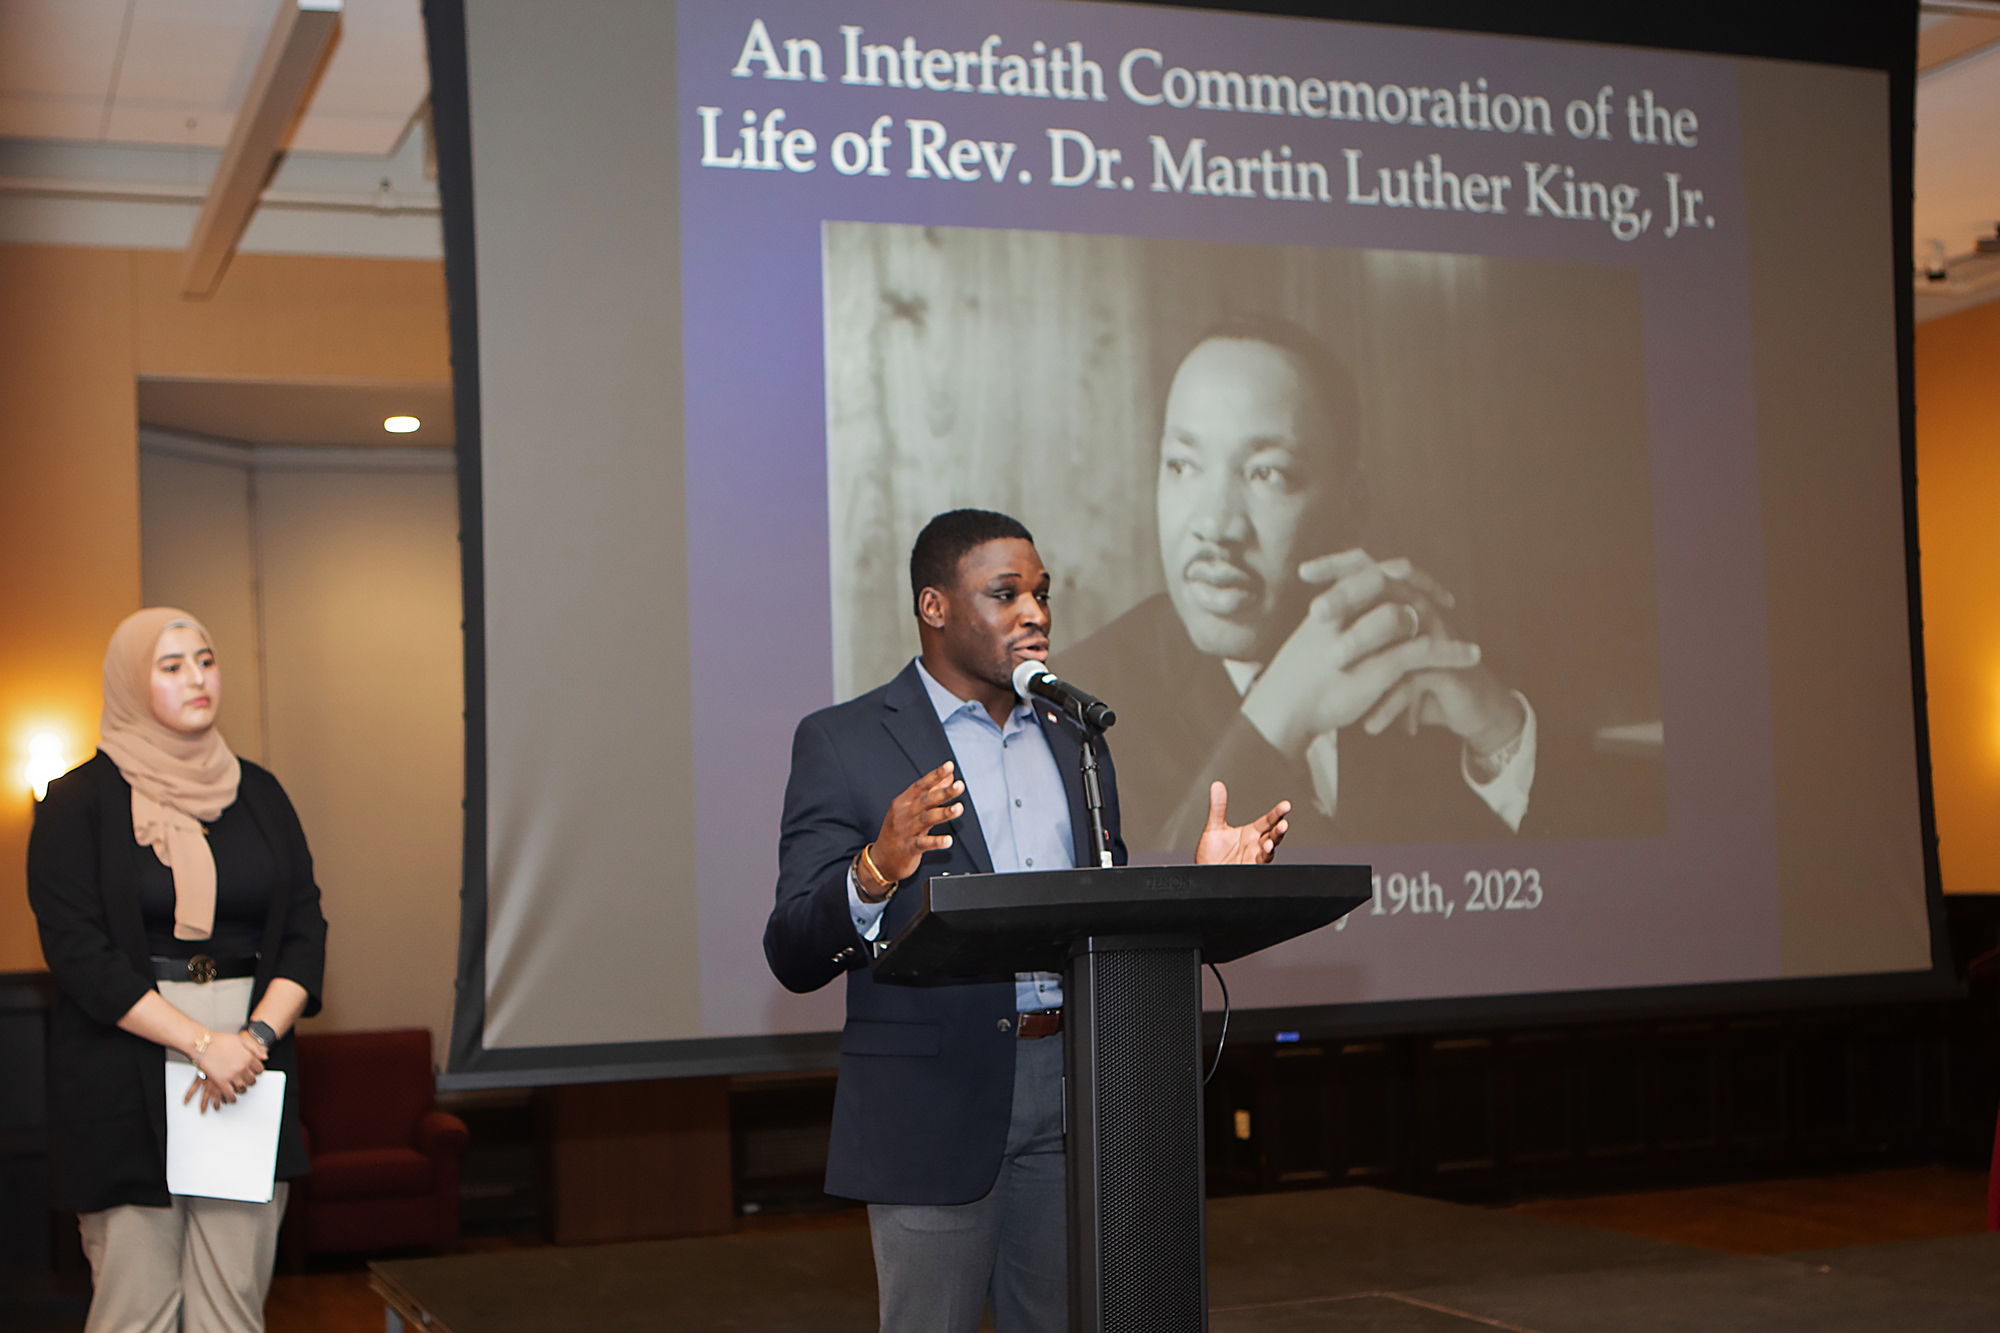 A man speaks at a podium with a woman waiting behind him. The screen says "An Interfaith Commemoration of the Life of Rev. Dr. Martin Luther King, Jr."